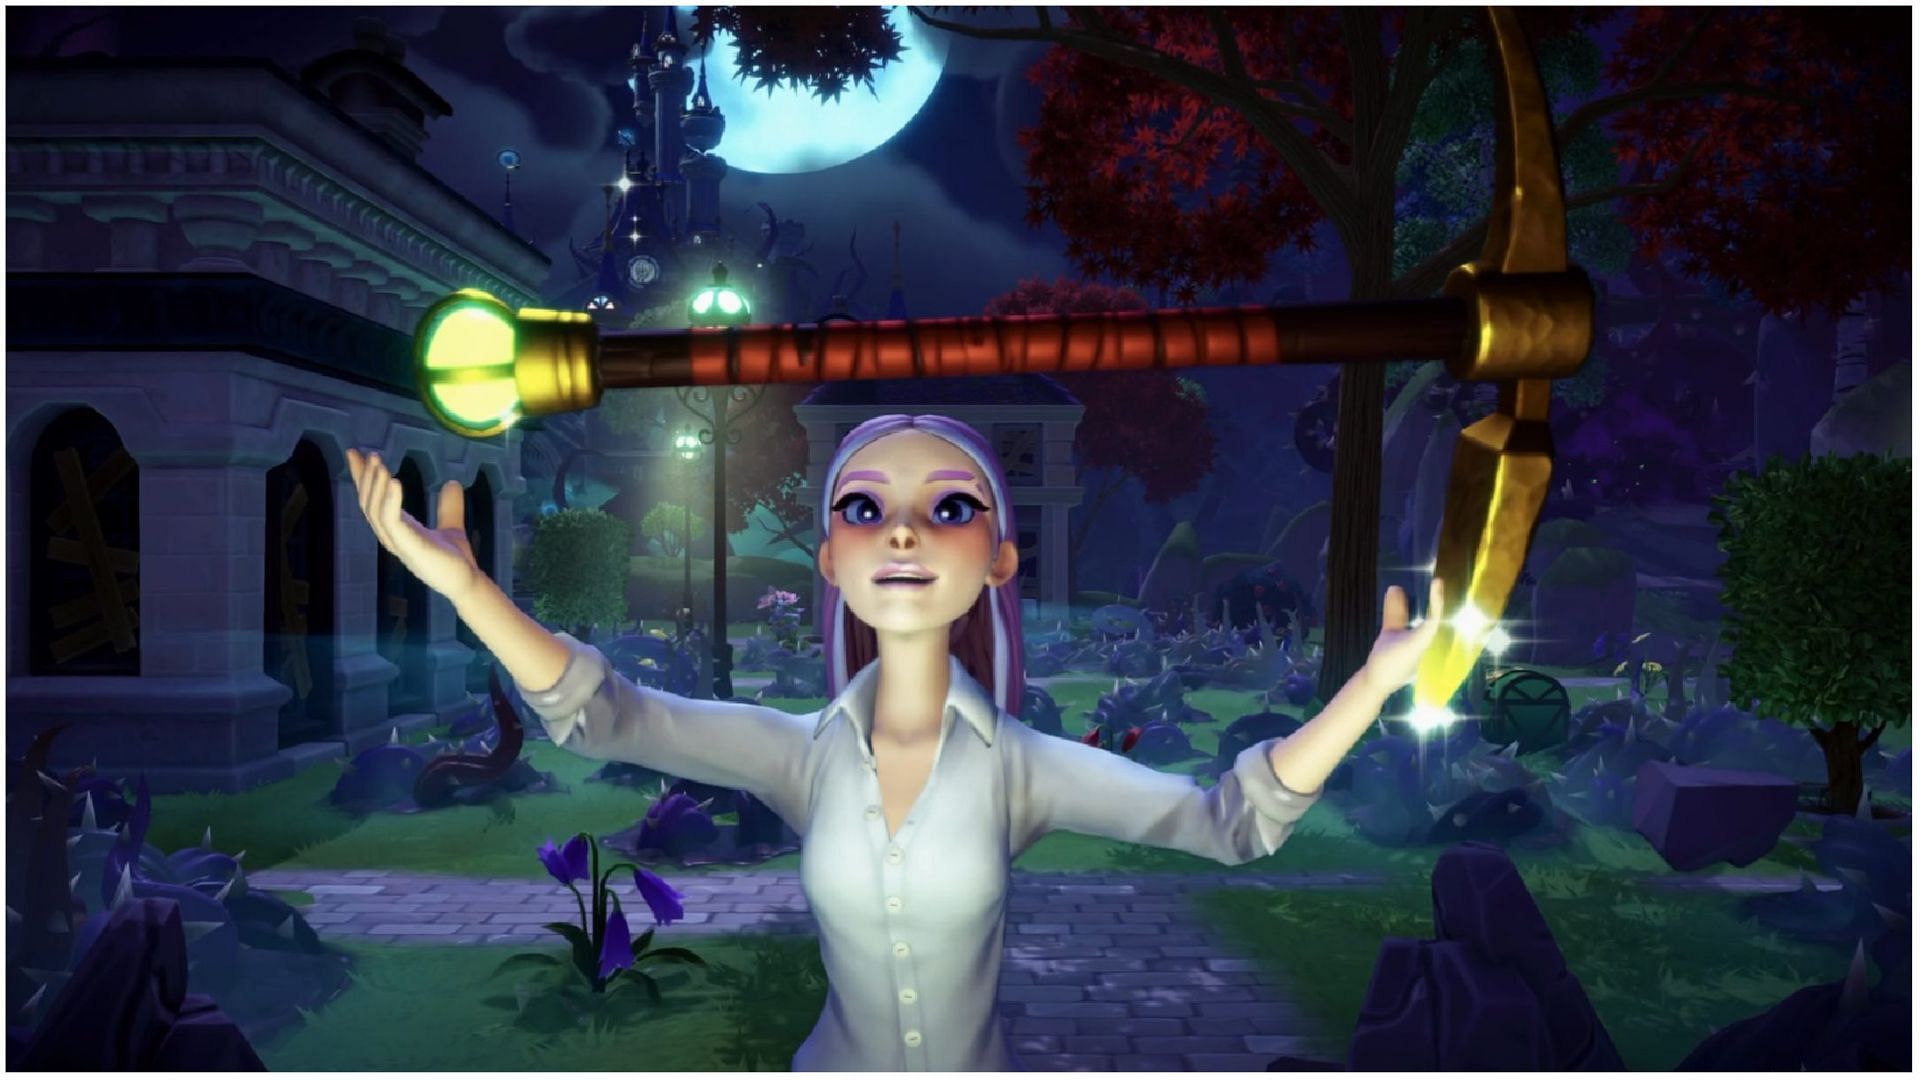 The pickaxe is an essential tool in Disney Dreamlight Valley (Image via Gameloft)